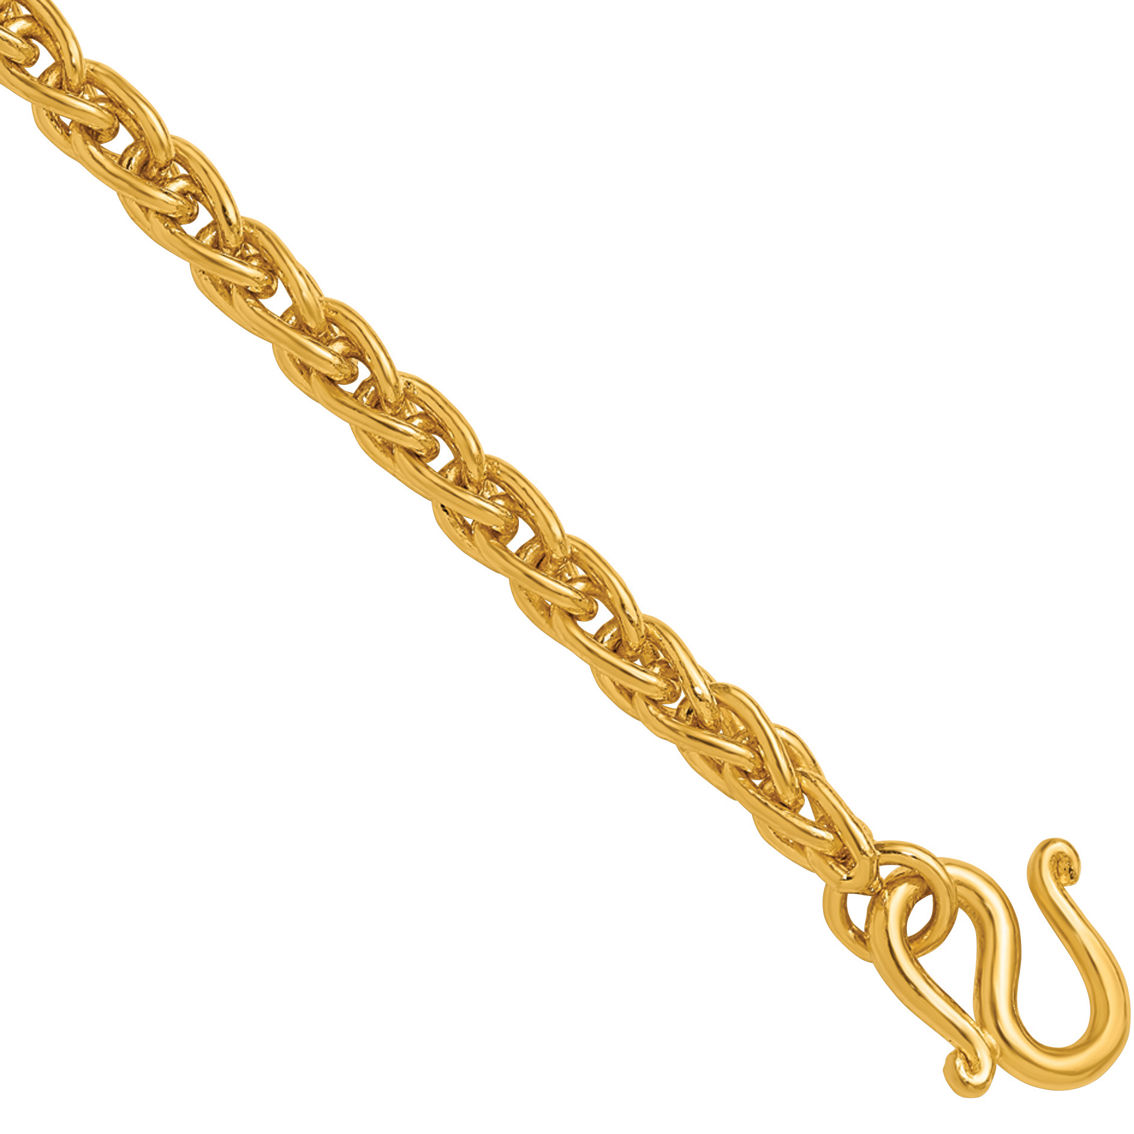 24K Pure Gold 5.2mm Solid Wheat Chain 8 in. Bracelet - Image 3 of 5